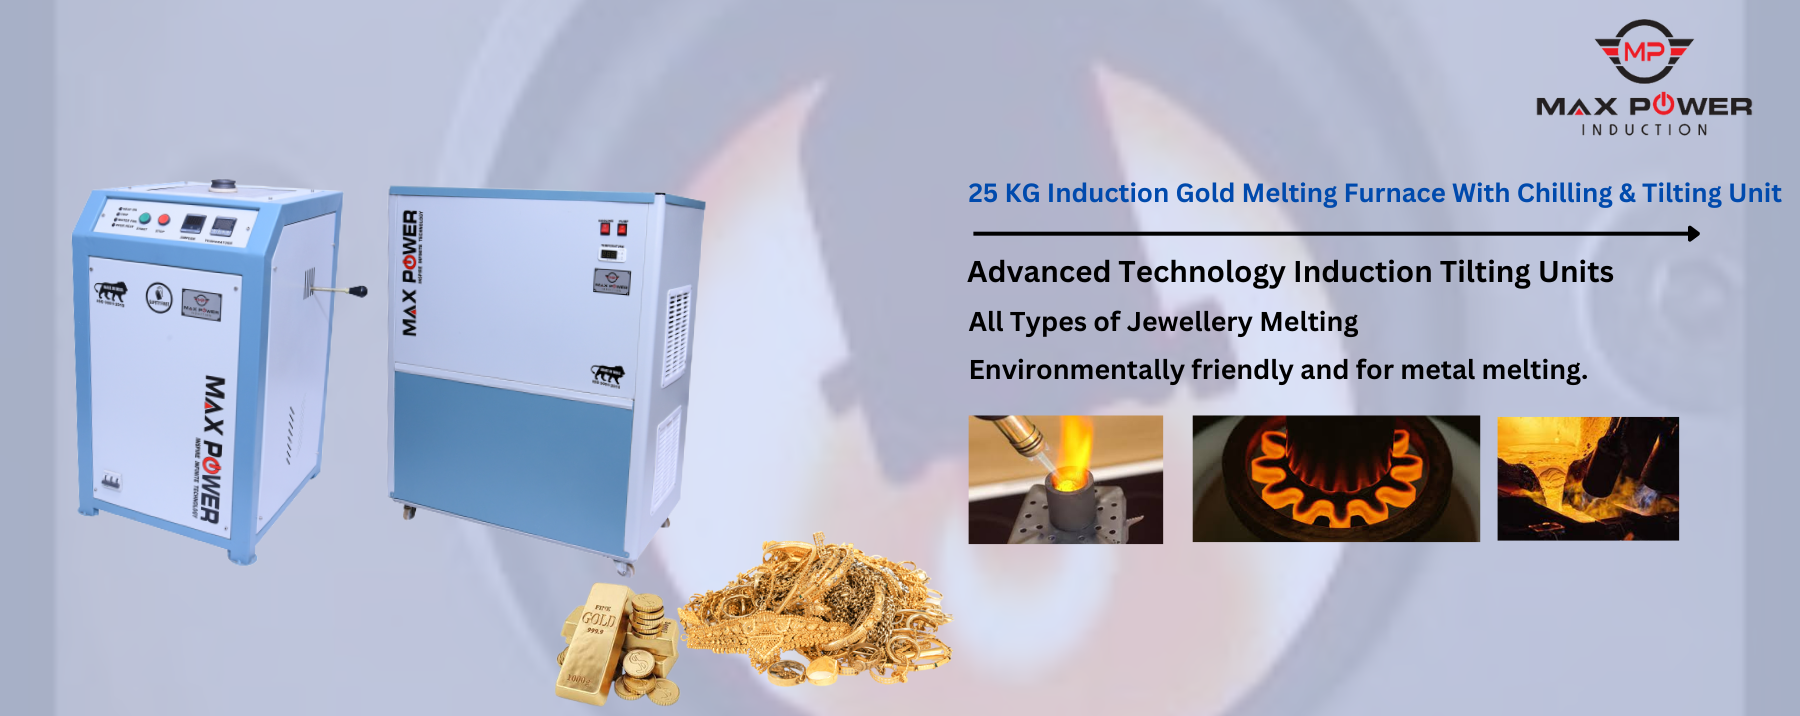 25 KG INDUCTION GOLD MELTING FURNACE WITH CHILLING TILTING UNIT MANUFACTURERS IN KERALA